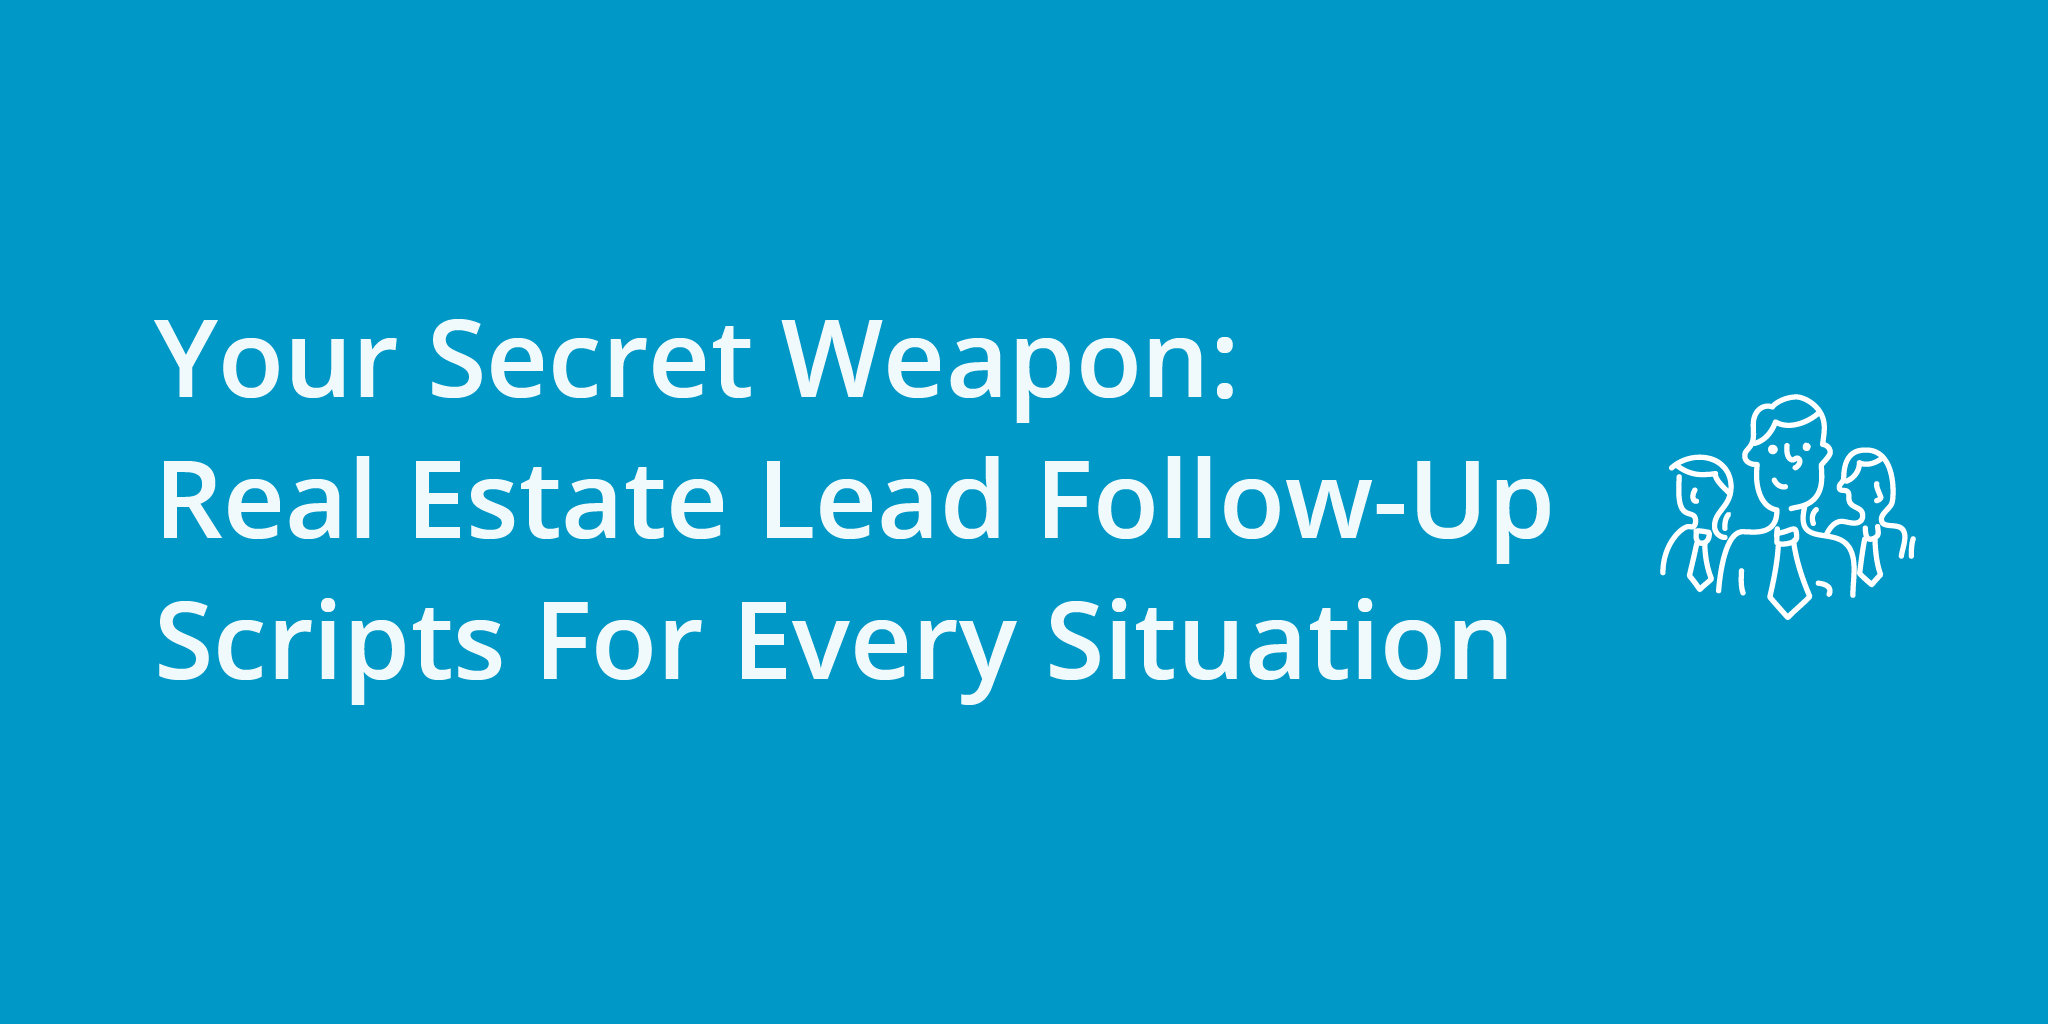 Your Secret Weapon: Real Estate Lead Follow-Up Scripts For Every Situation